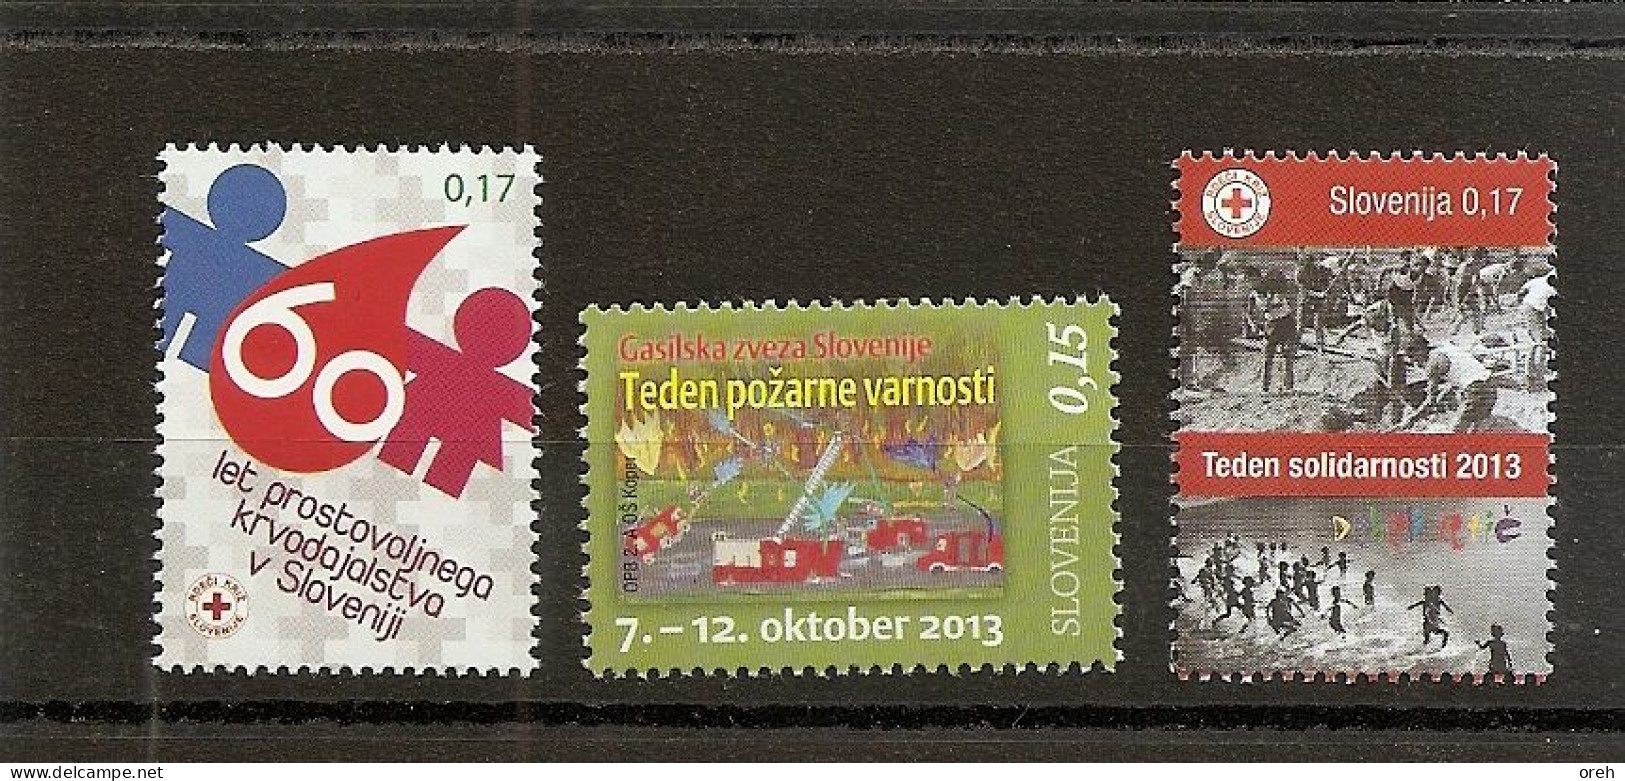 SLOVENIA  2013, RED CROSS,SOLIDARITY,,ADHESIVE,COMPLETE,MNH - Slovenië